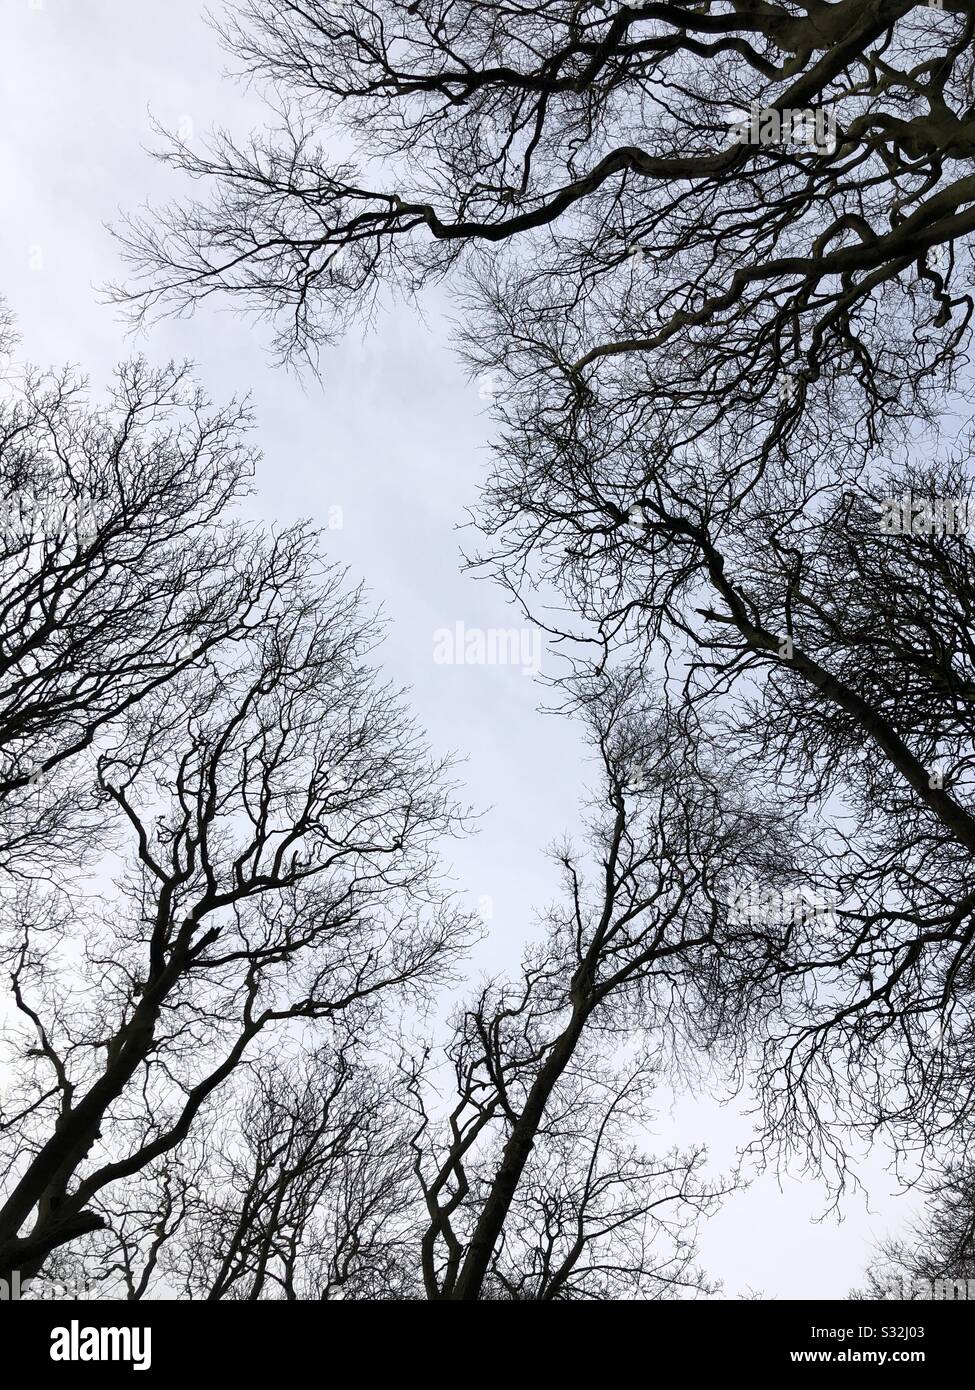 Looking up through leafless, winter trees Stock Photo